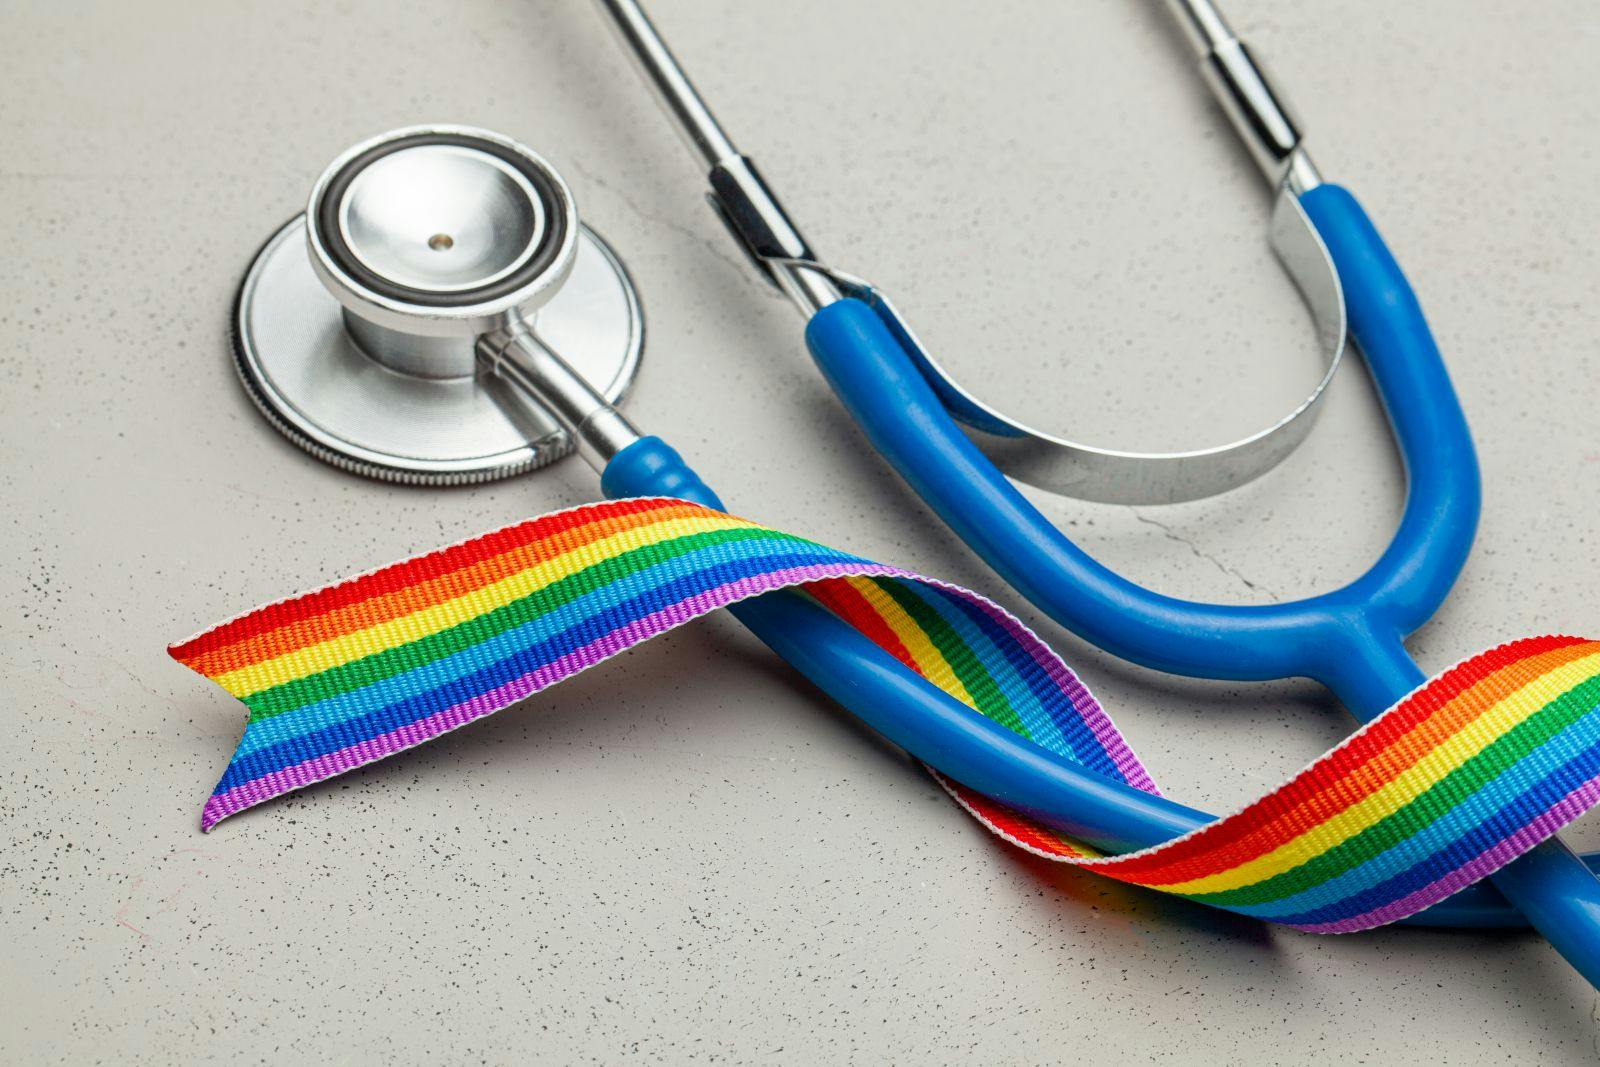 LGBTIA+ Education Should be Incorporated into Pharmacy Education